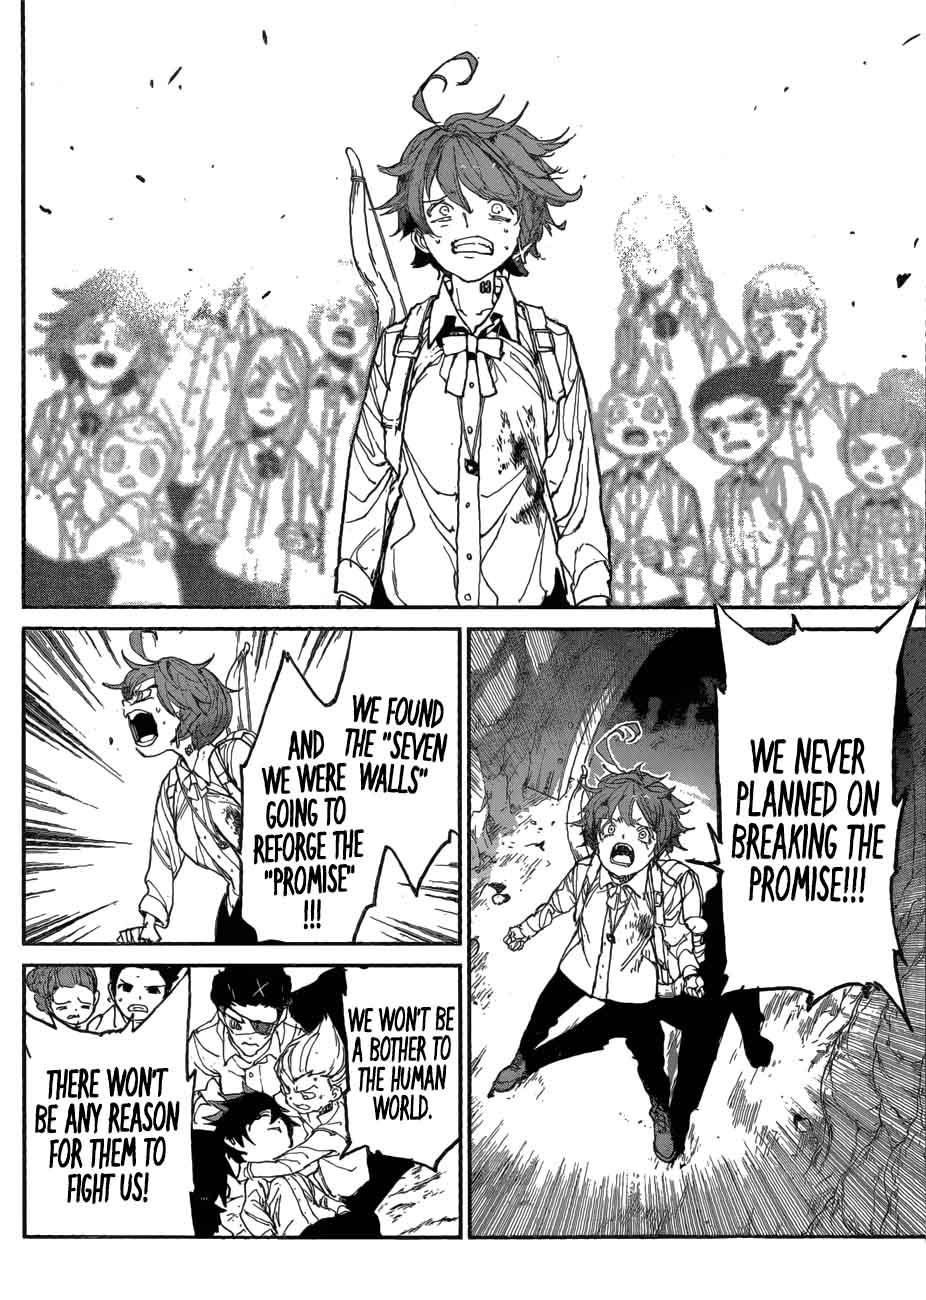 The Promised Neverland 105 13